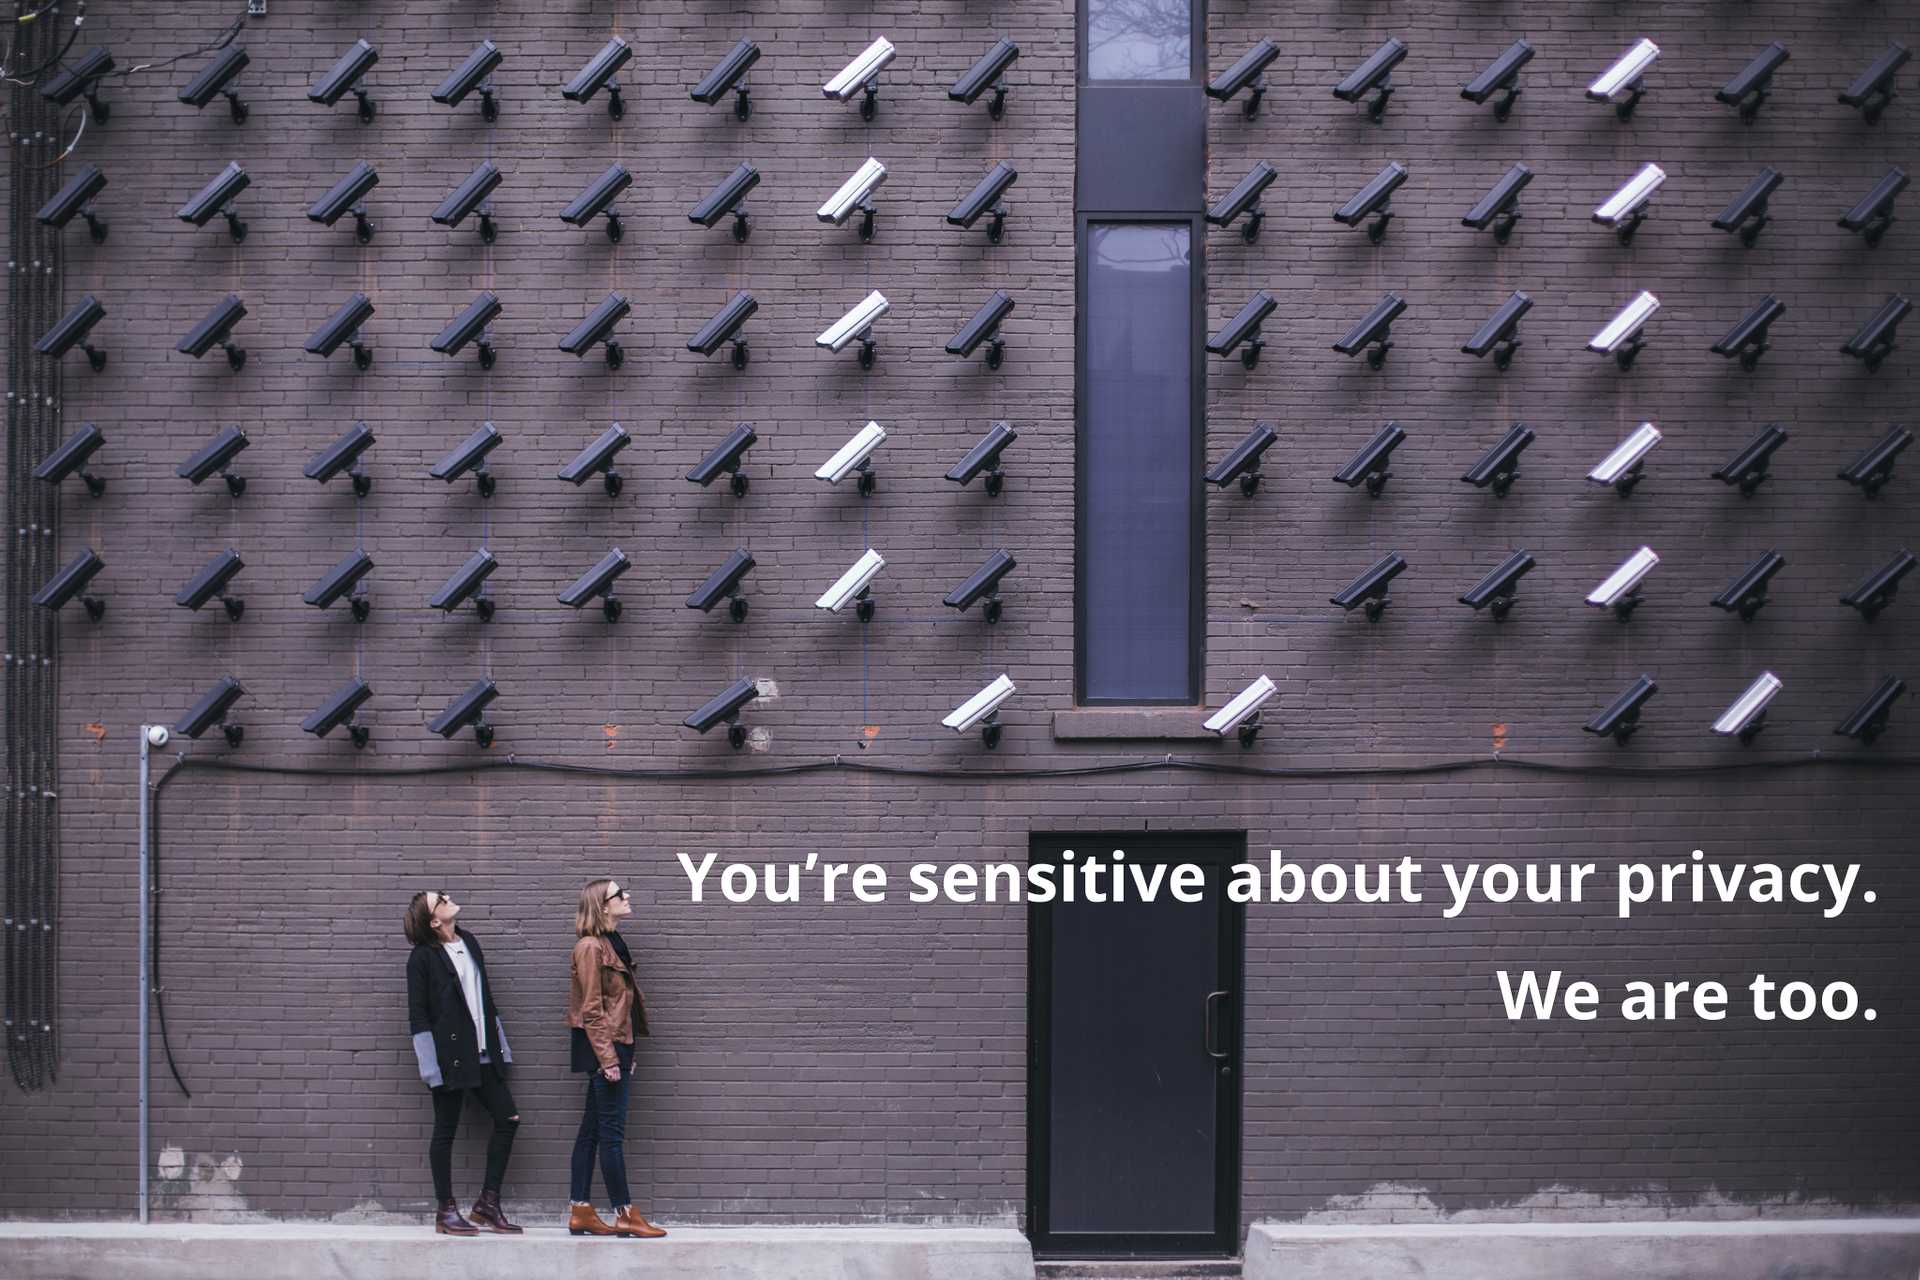 Photograph of dozens of security cameras pointed at two individuals on a street. Text `You're sensitive about your privacy. We are too.` overlayed on image.